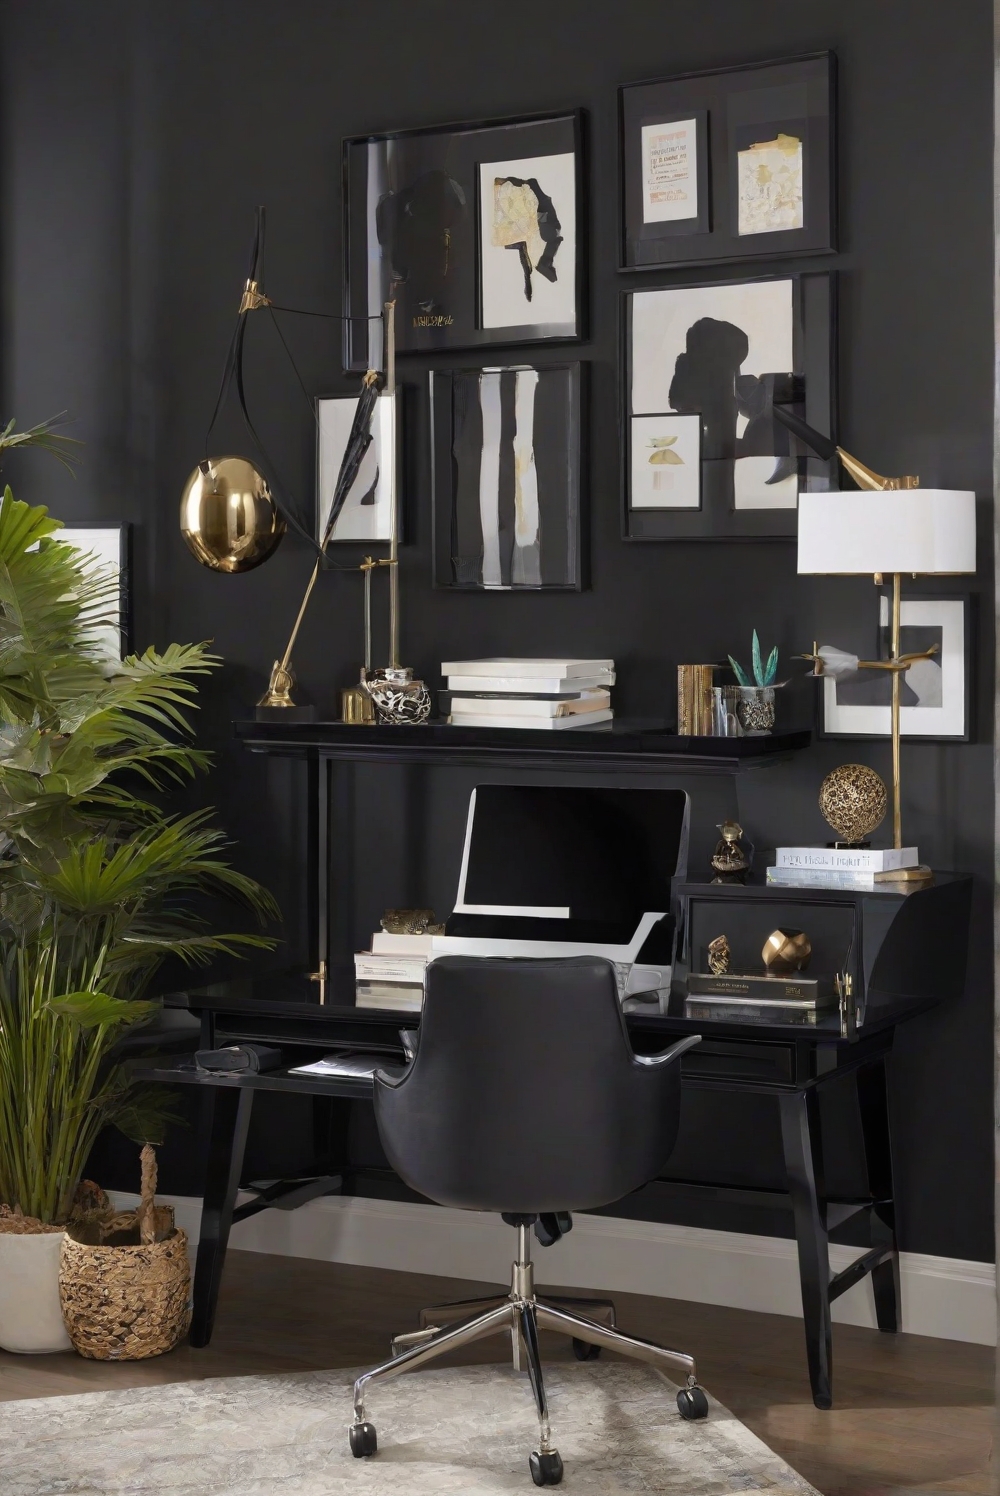 Tricorn Black paint, office wall decor, office design ideas, corporate office decor, professional office interior, elegant office design, sophisticated office space